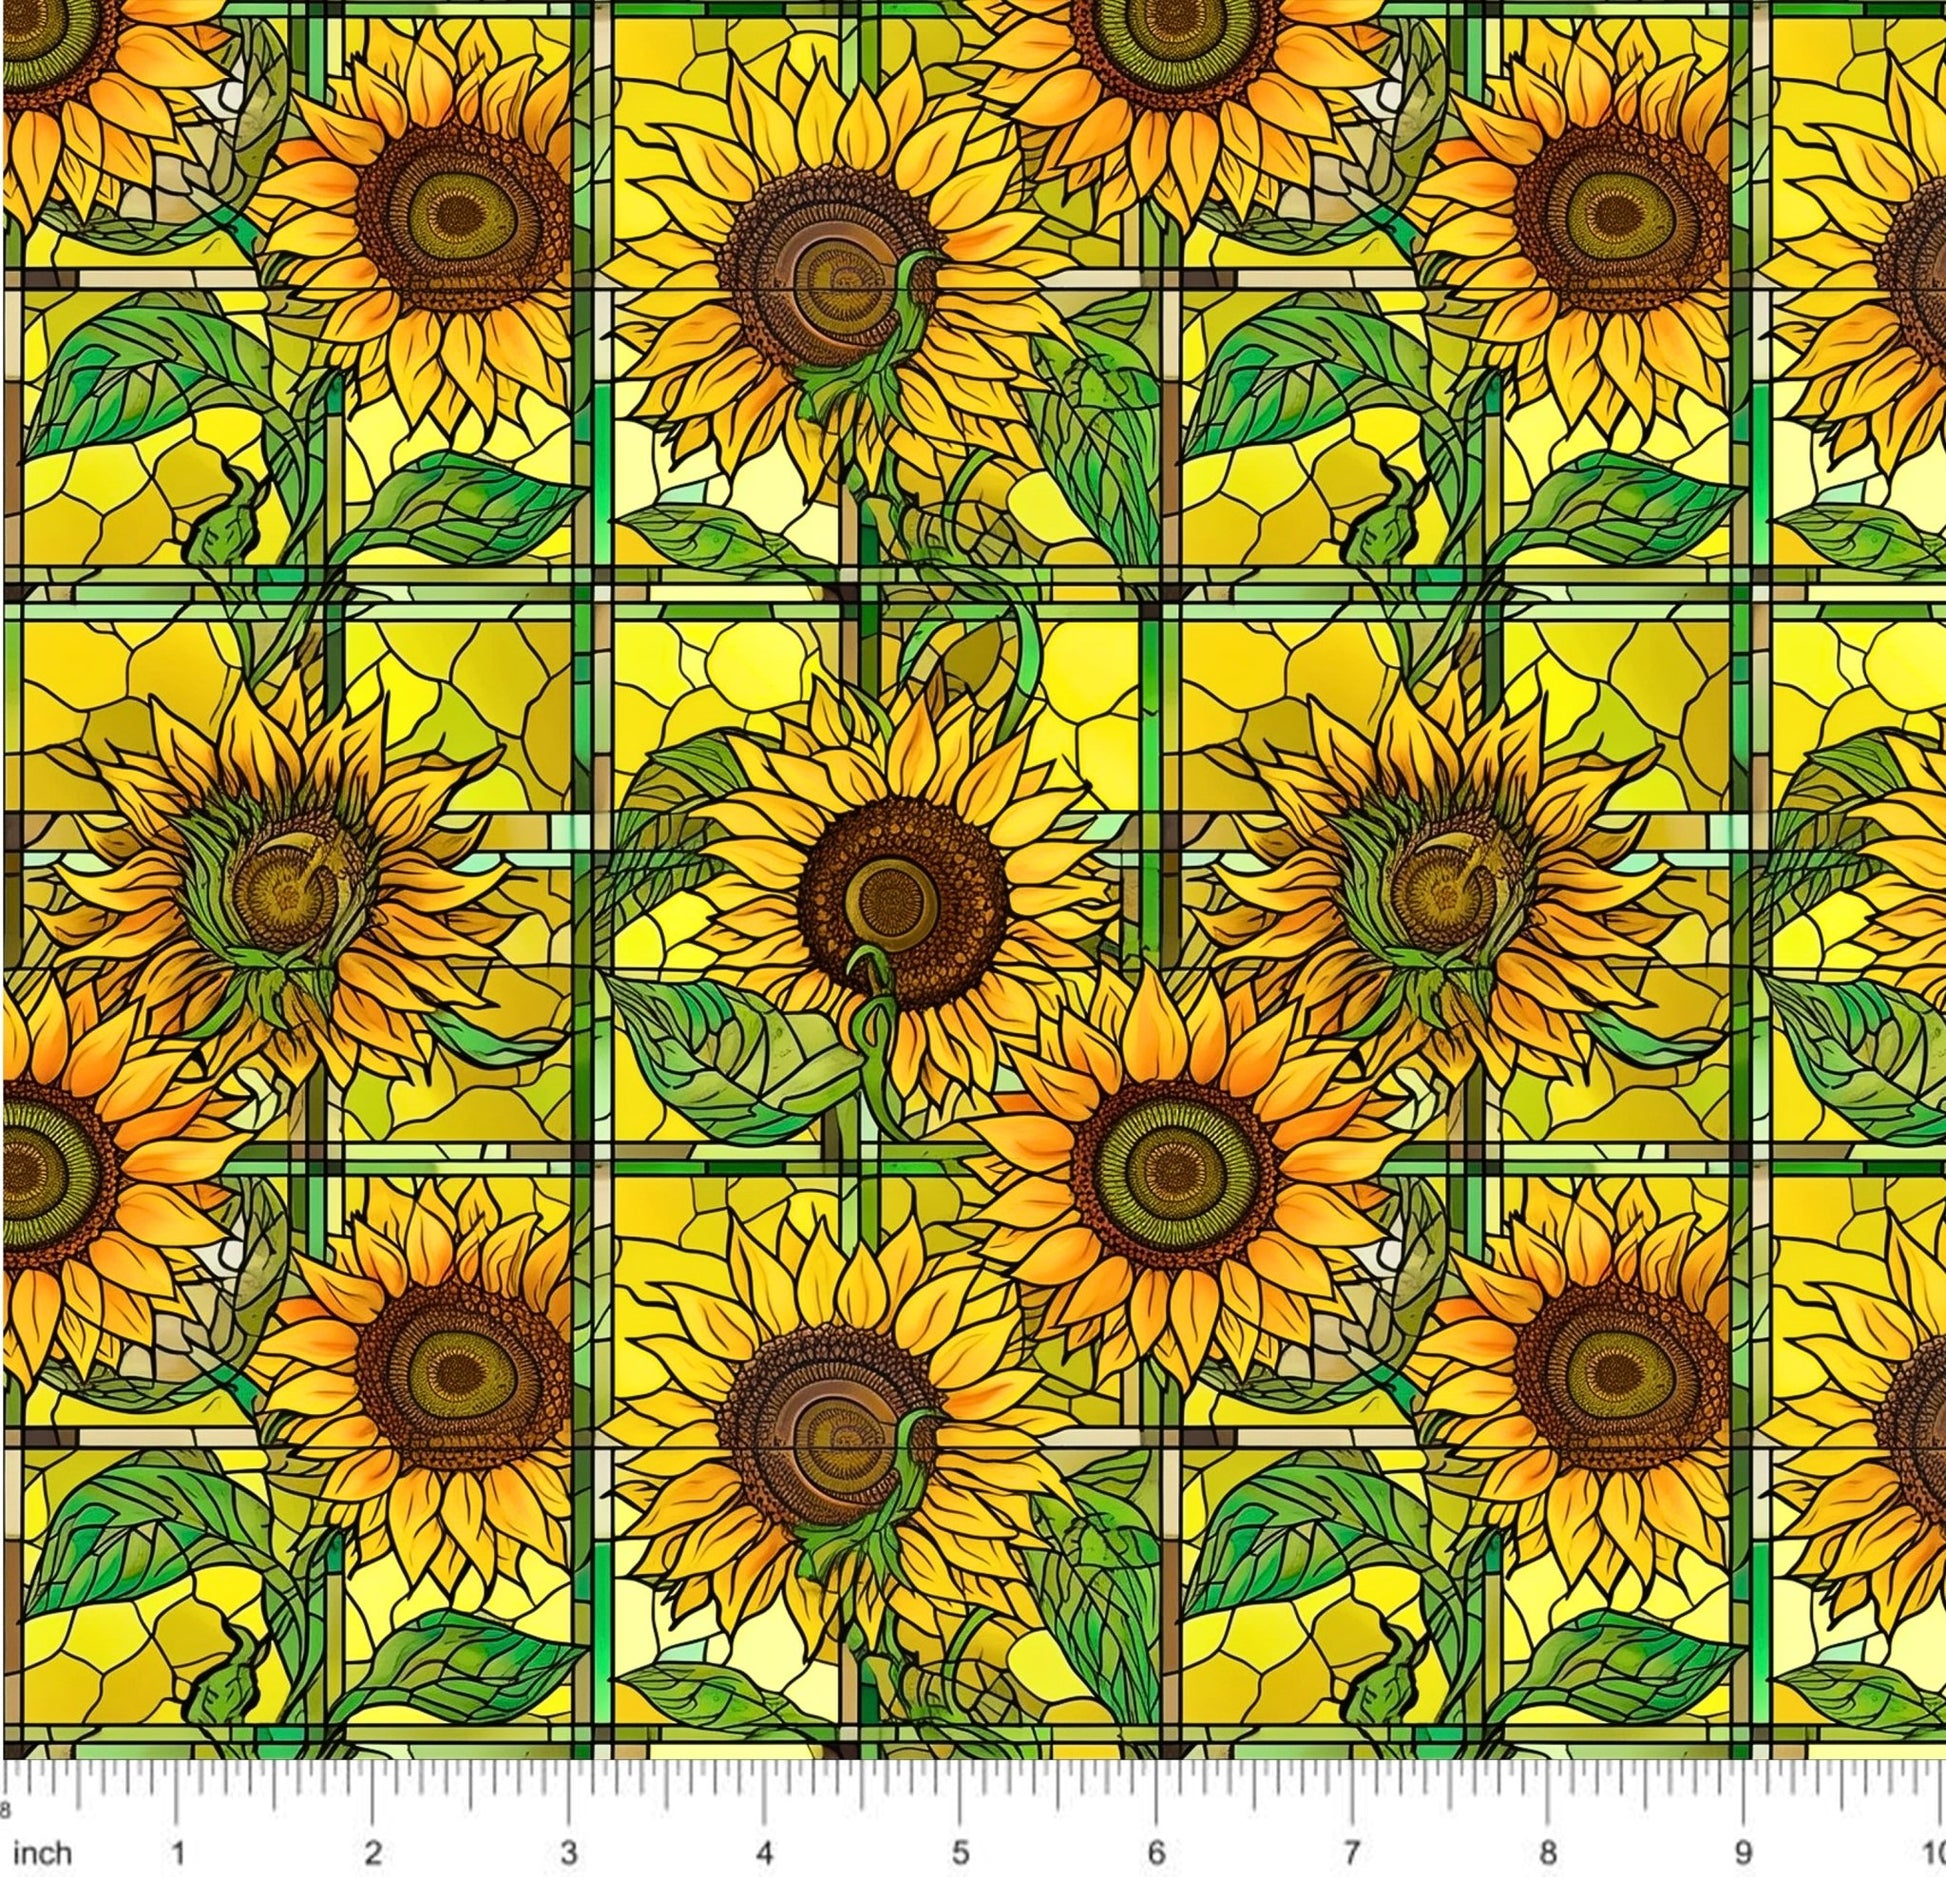 Bonnie's Boujee Designs - Sunflower Stained Glass - Little Rhody Sewing Co.